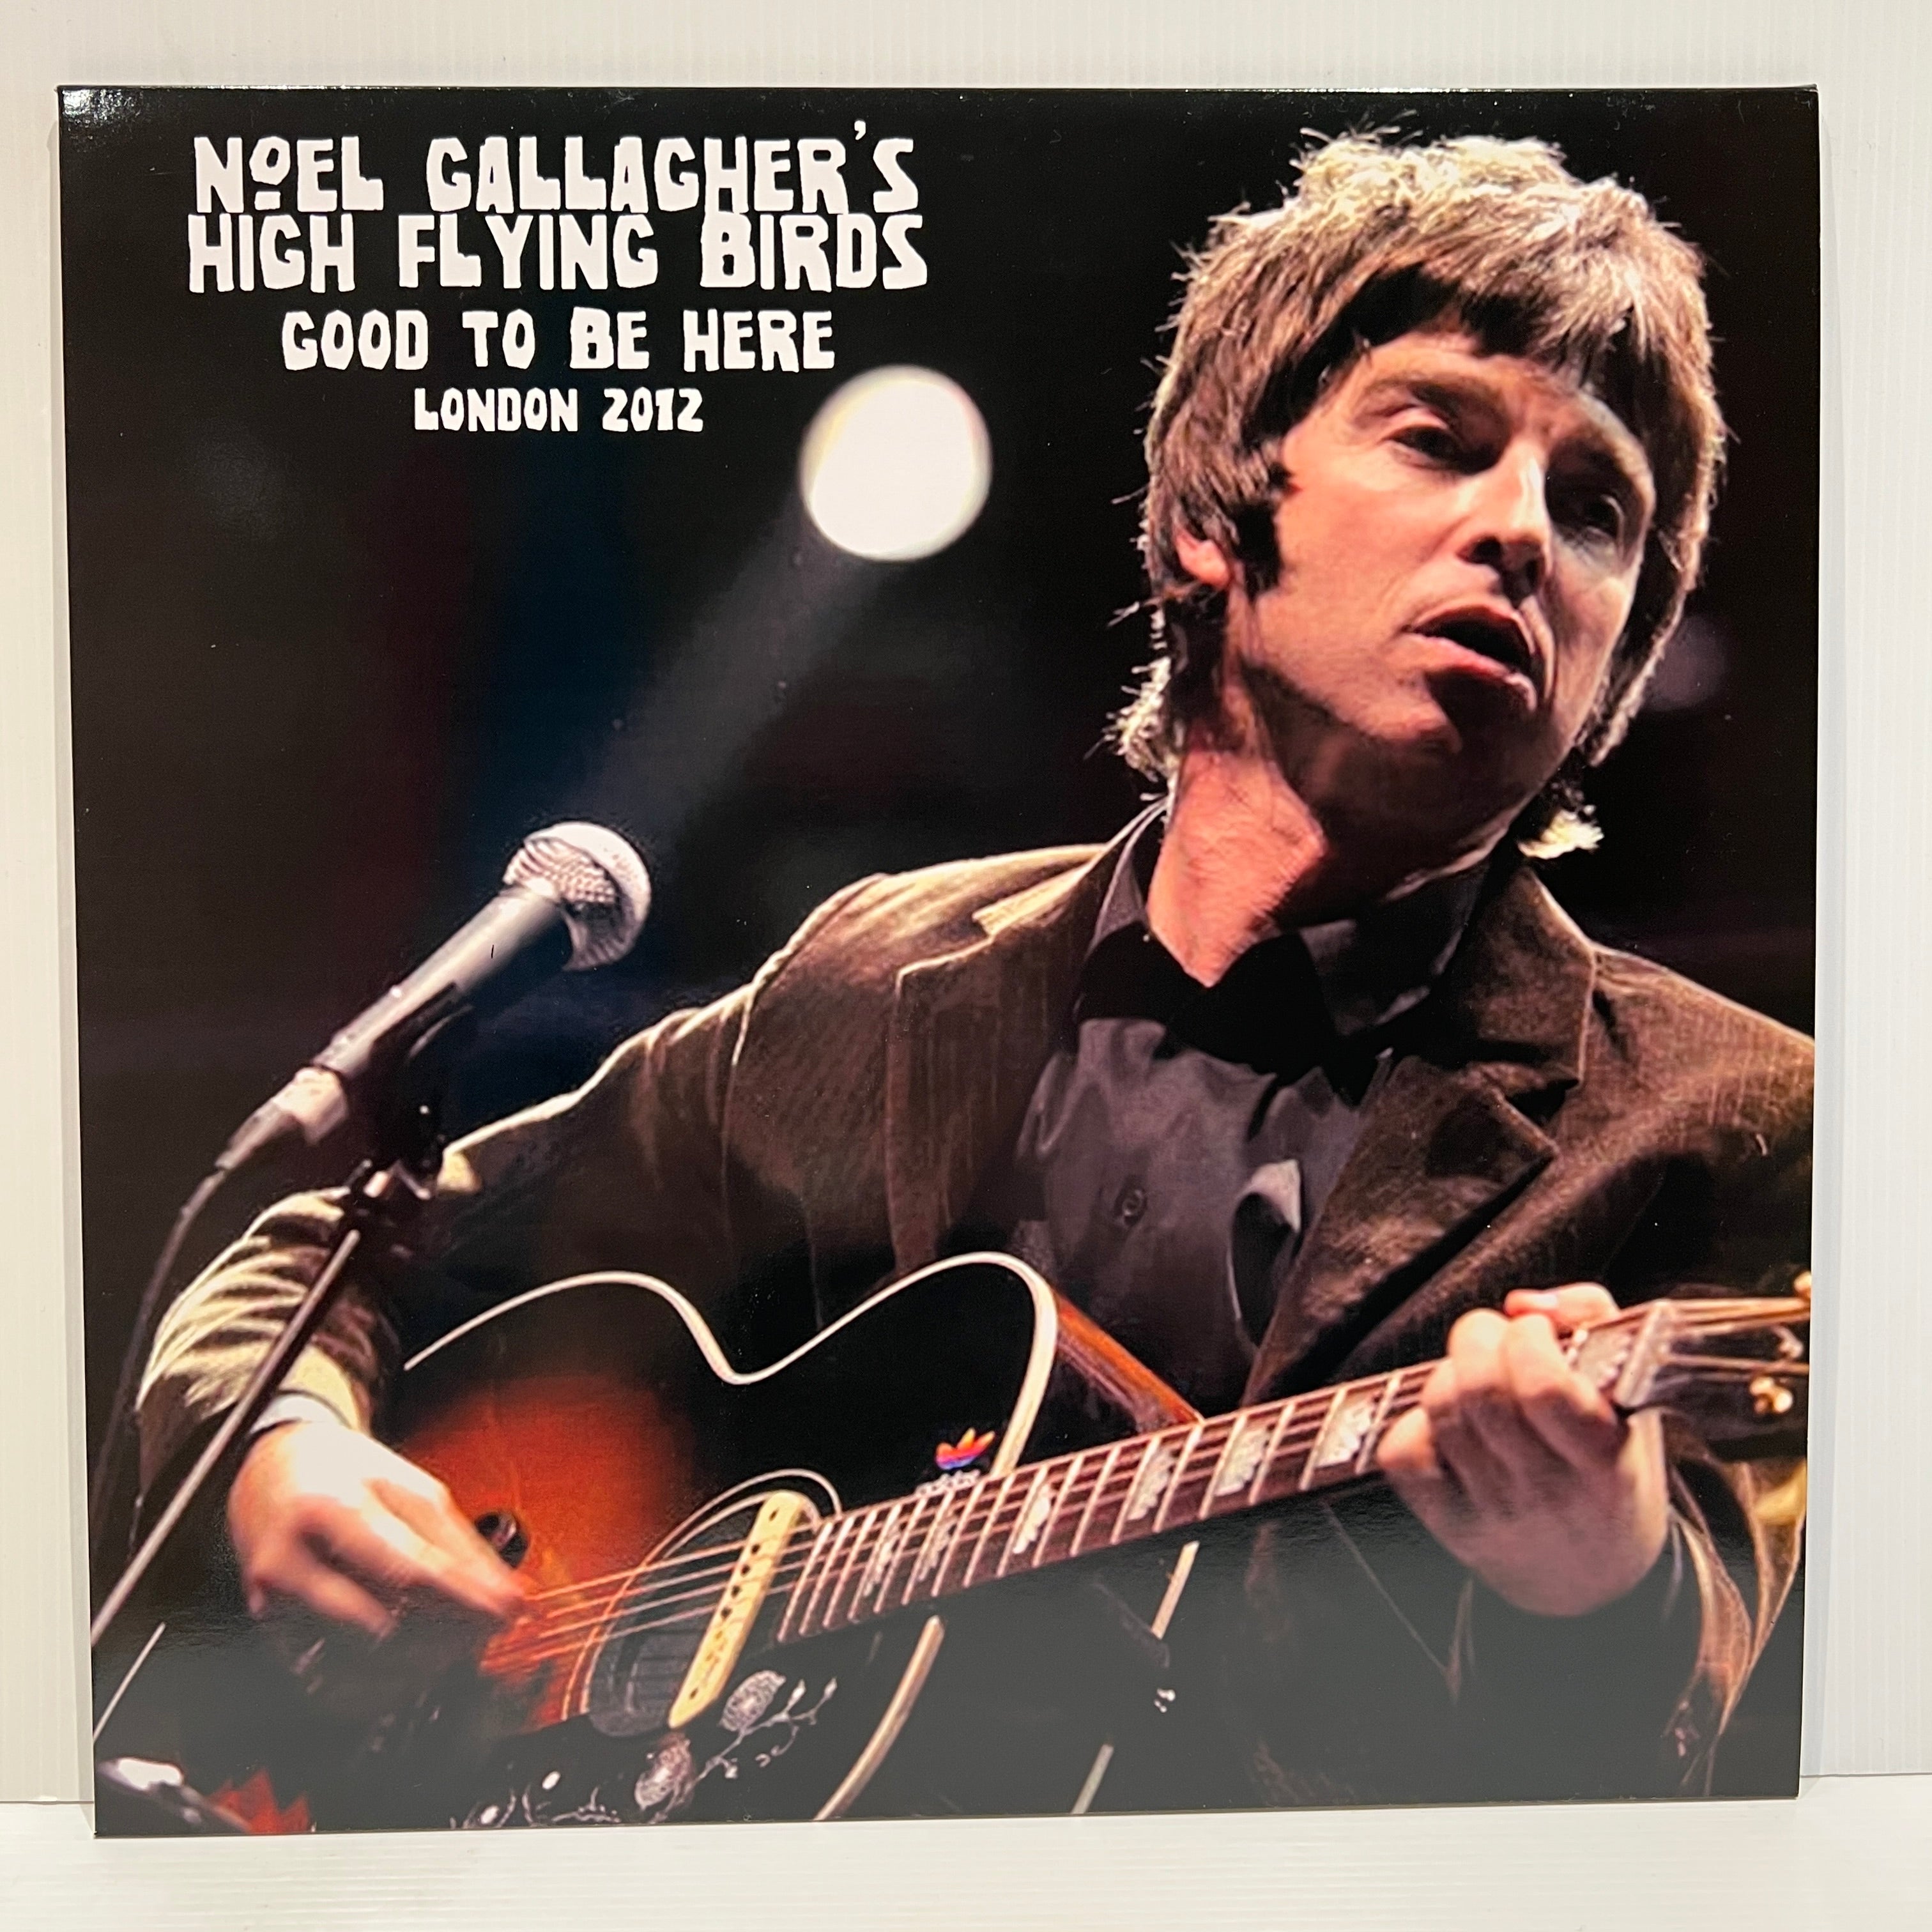 Noel Gallagher - OASIS - Good To Be Here - rare limited purple vinyl LP